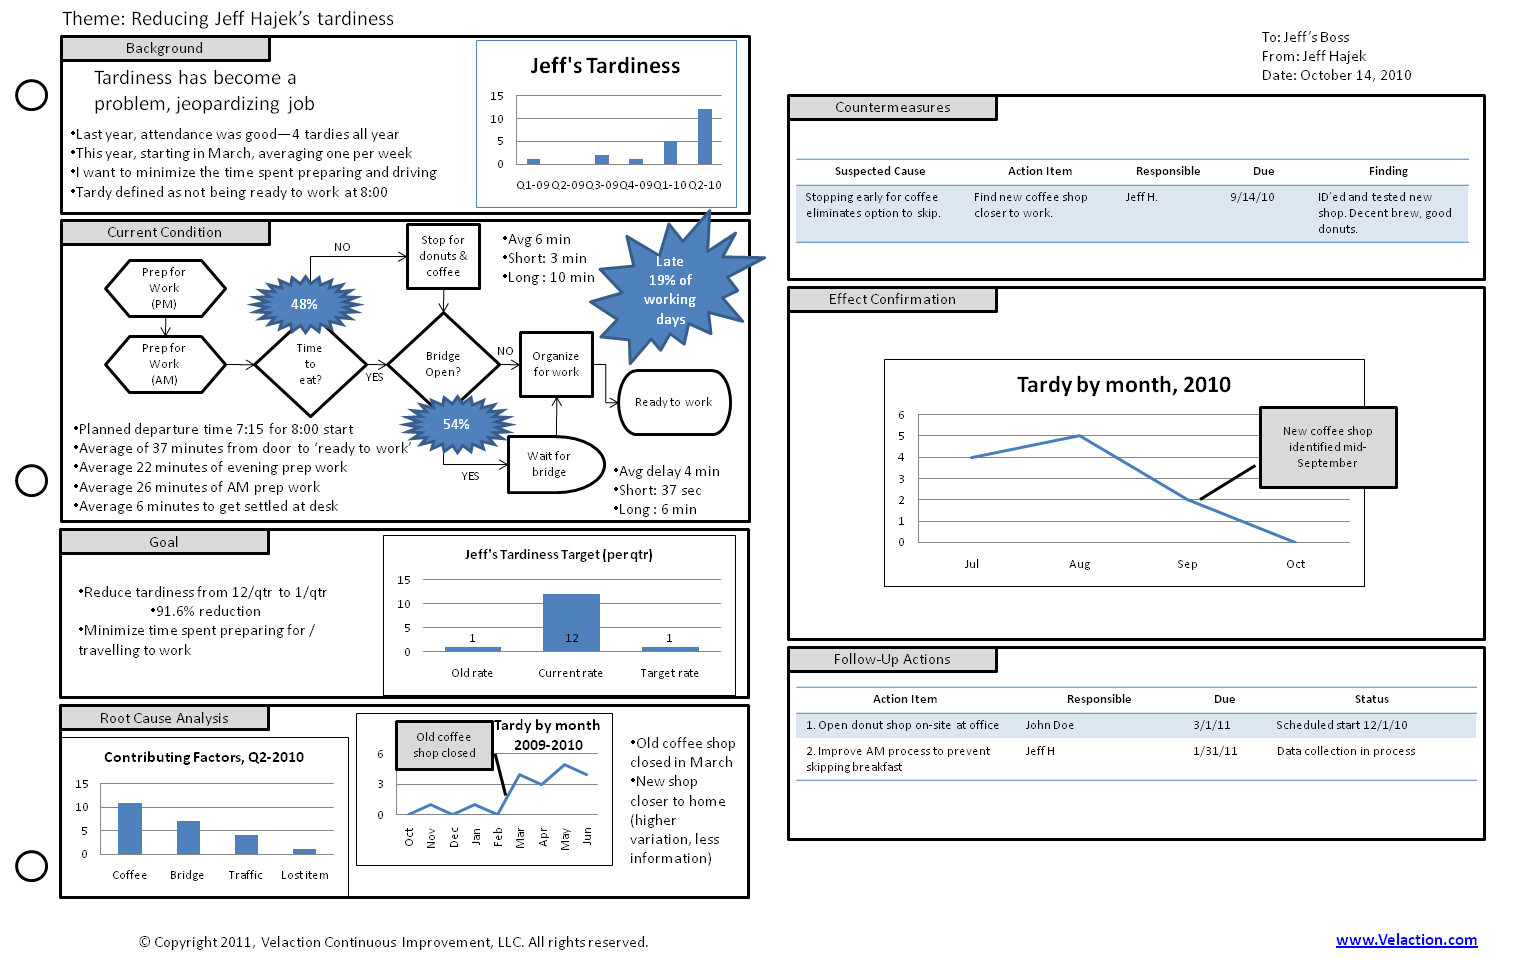 A3 Report Template Xls ] – A3 Report Template For Lean A3 Within 8D Report Template Xls